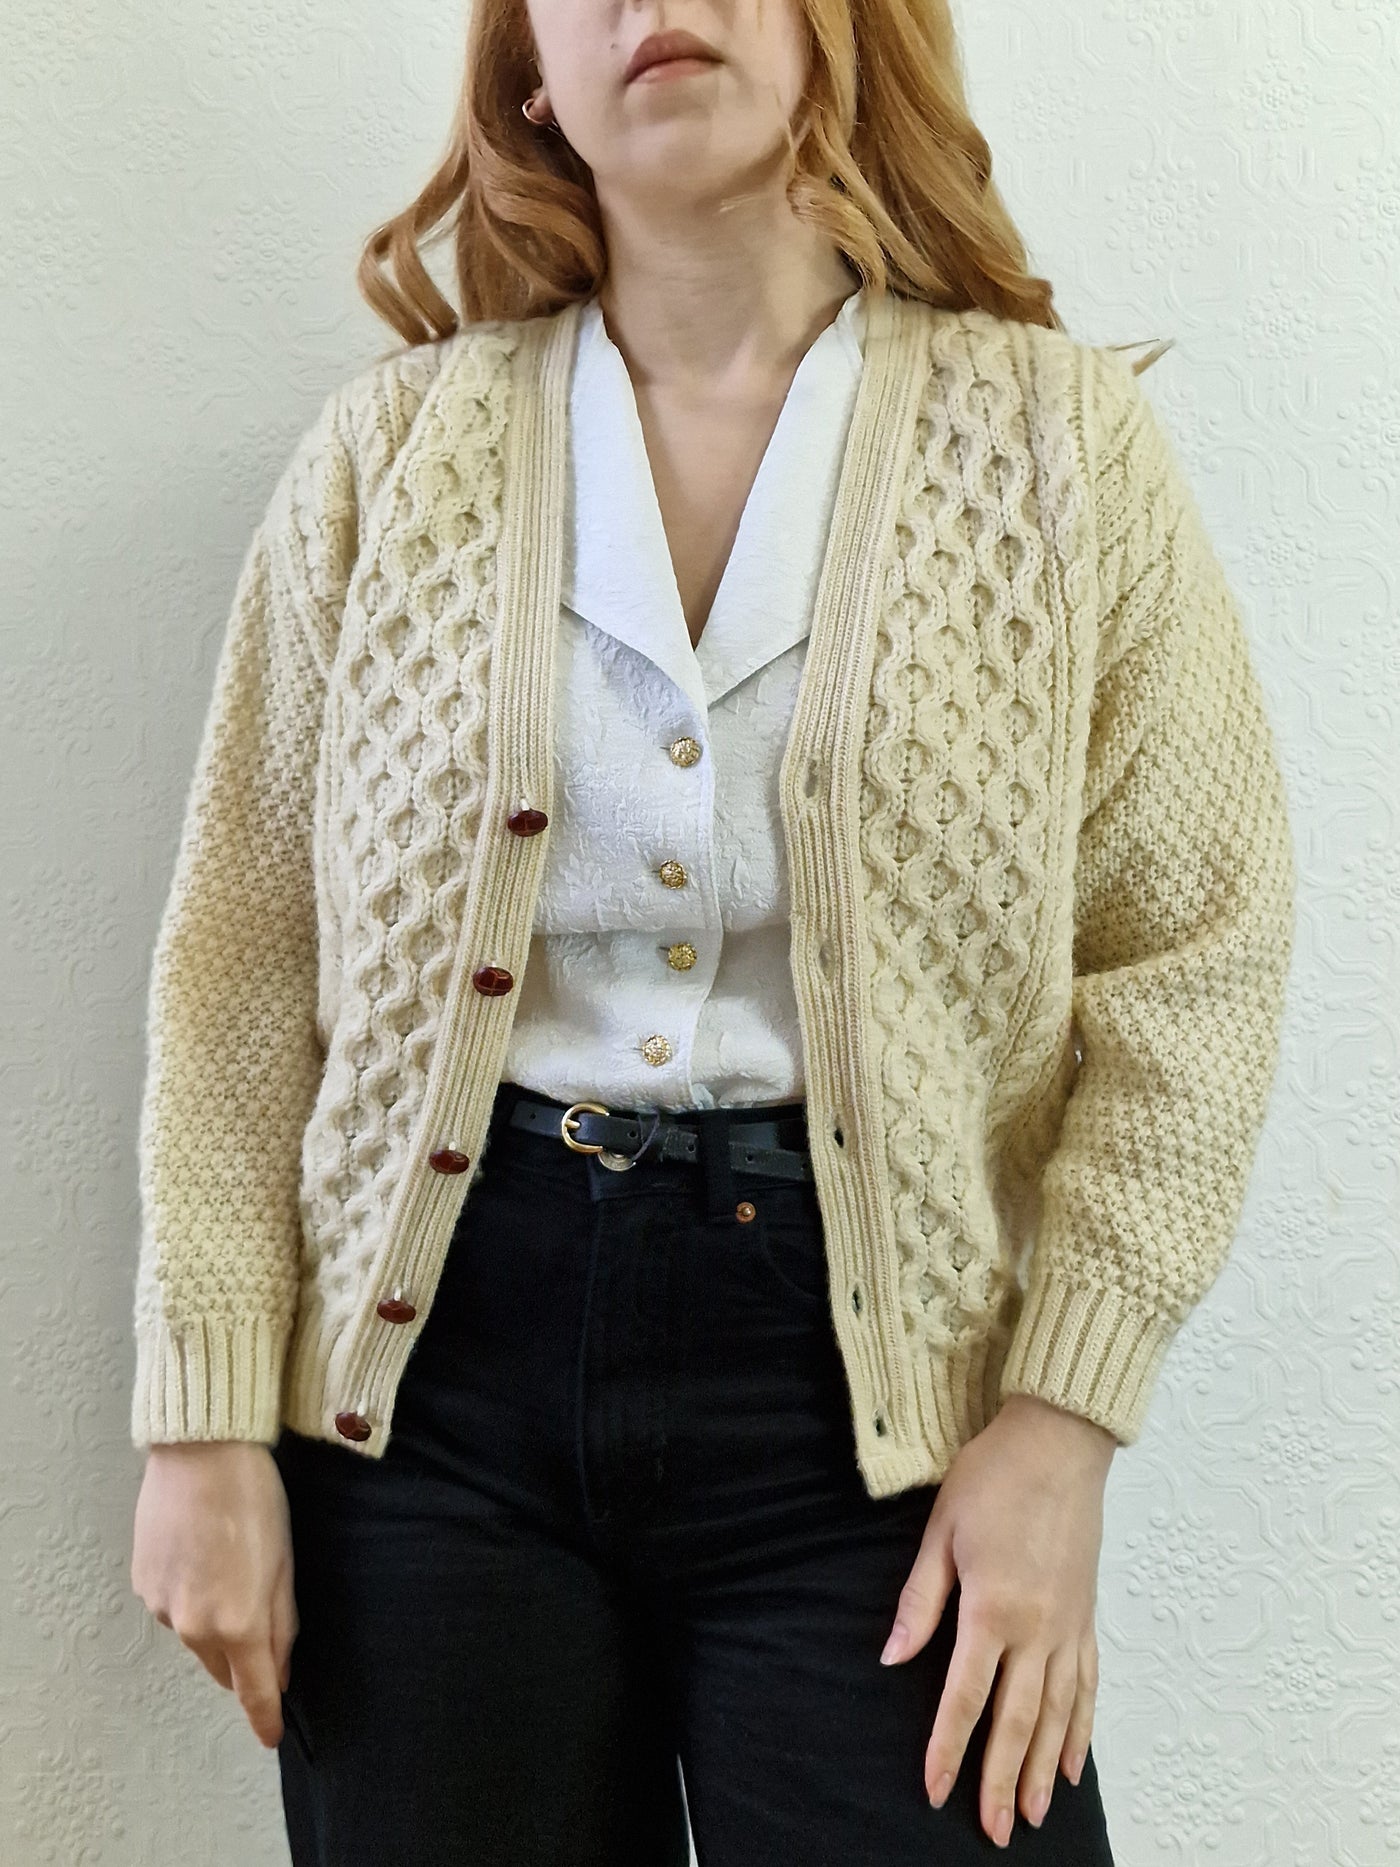 Vintage Pure Wool Cream V-Neck Aran Cardigan by Highland Home Industries - S/M